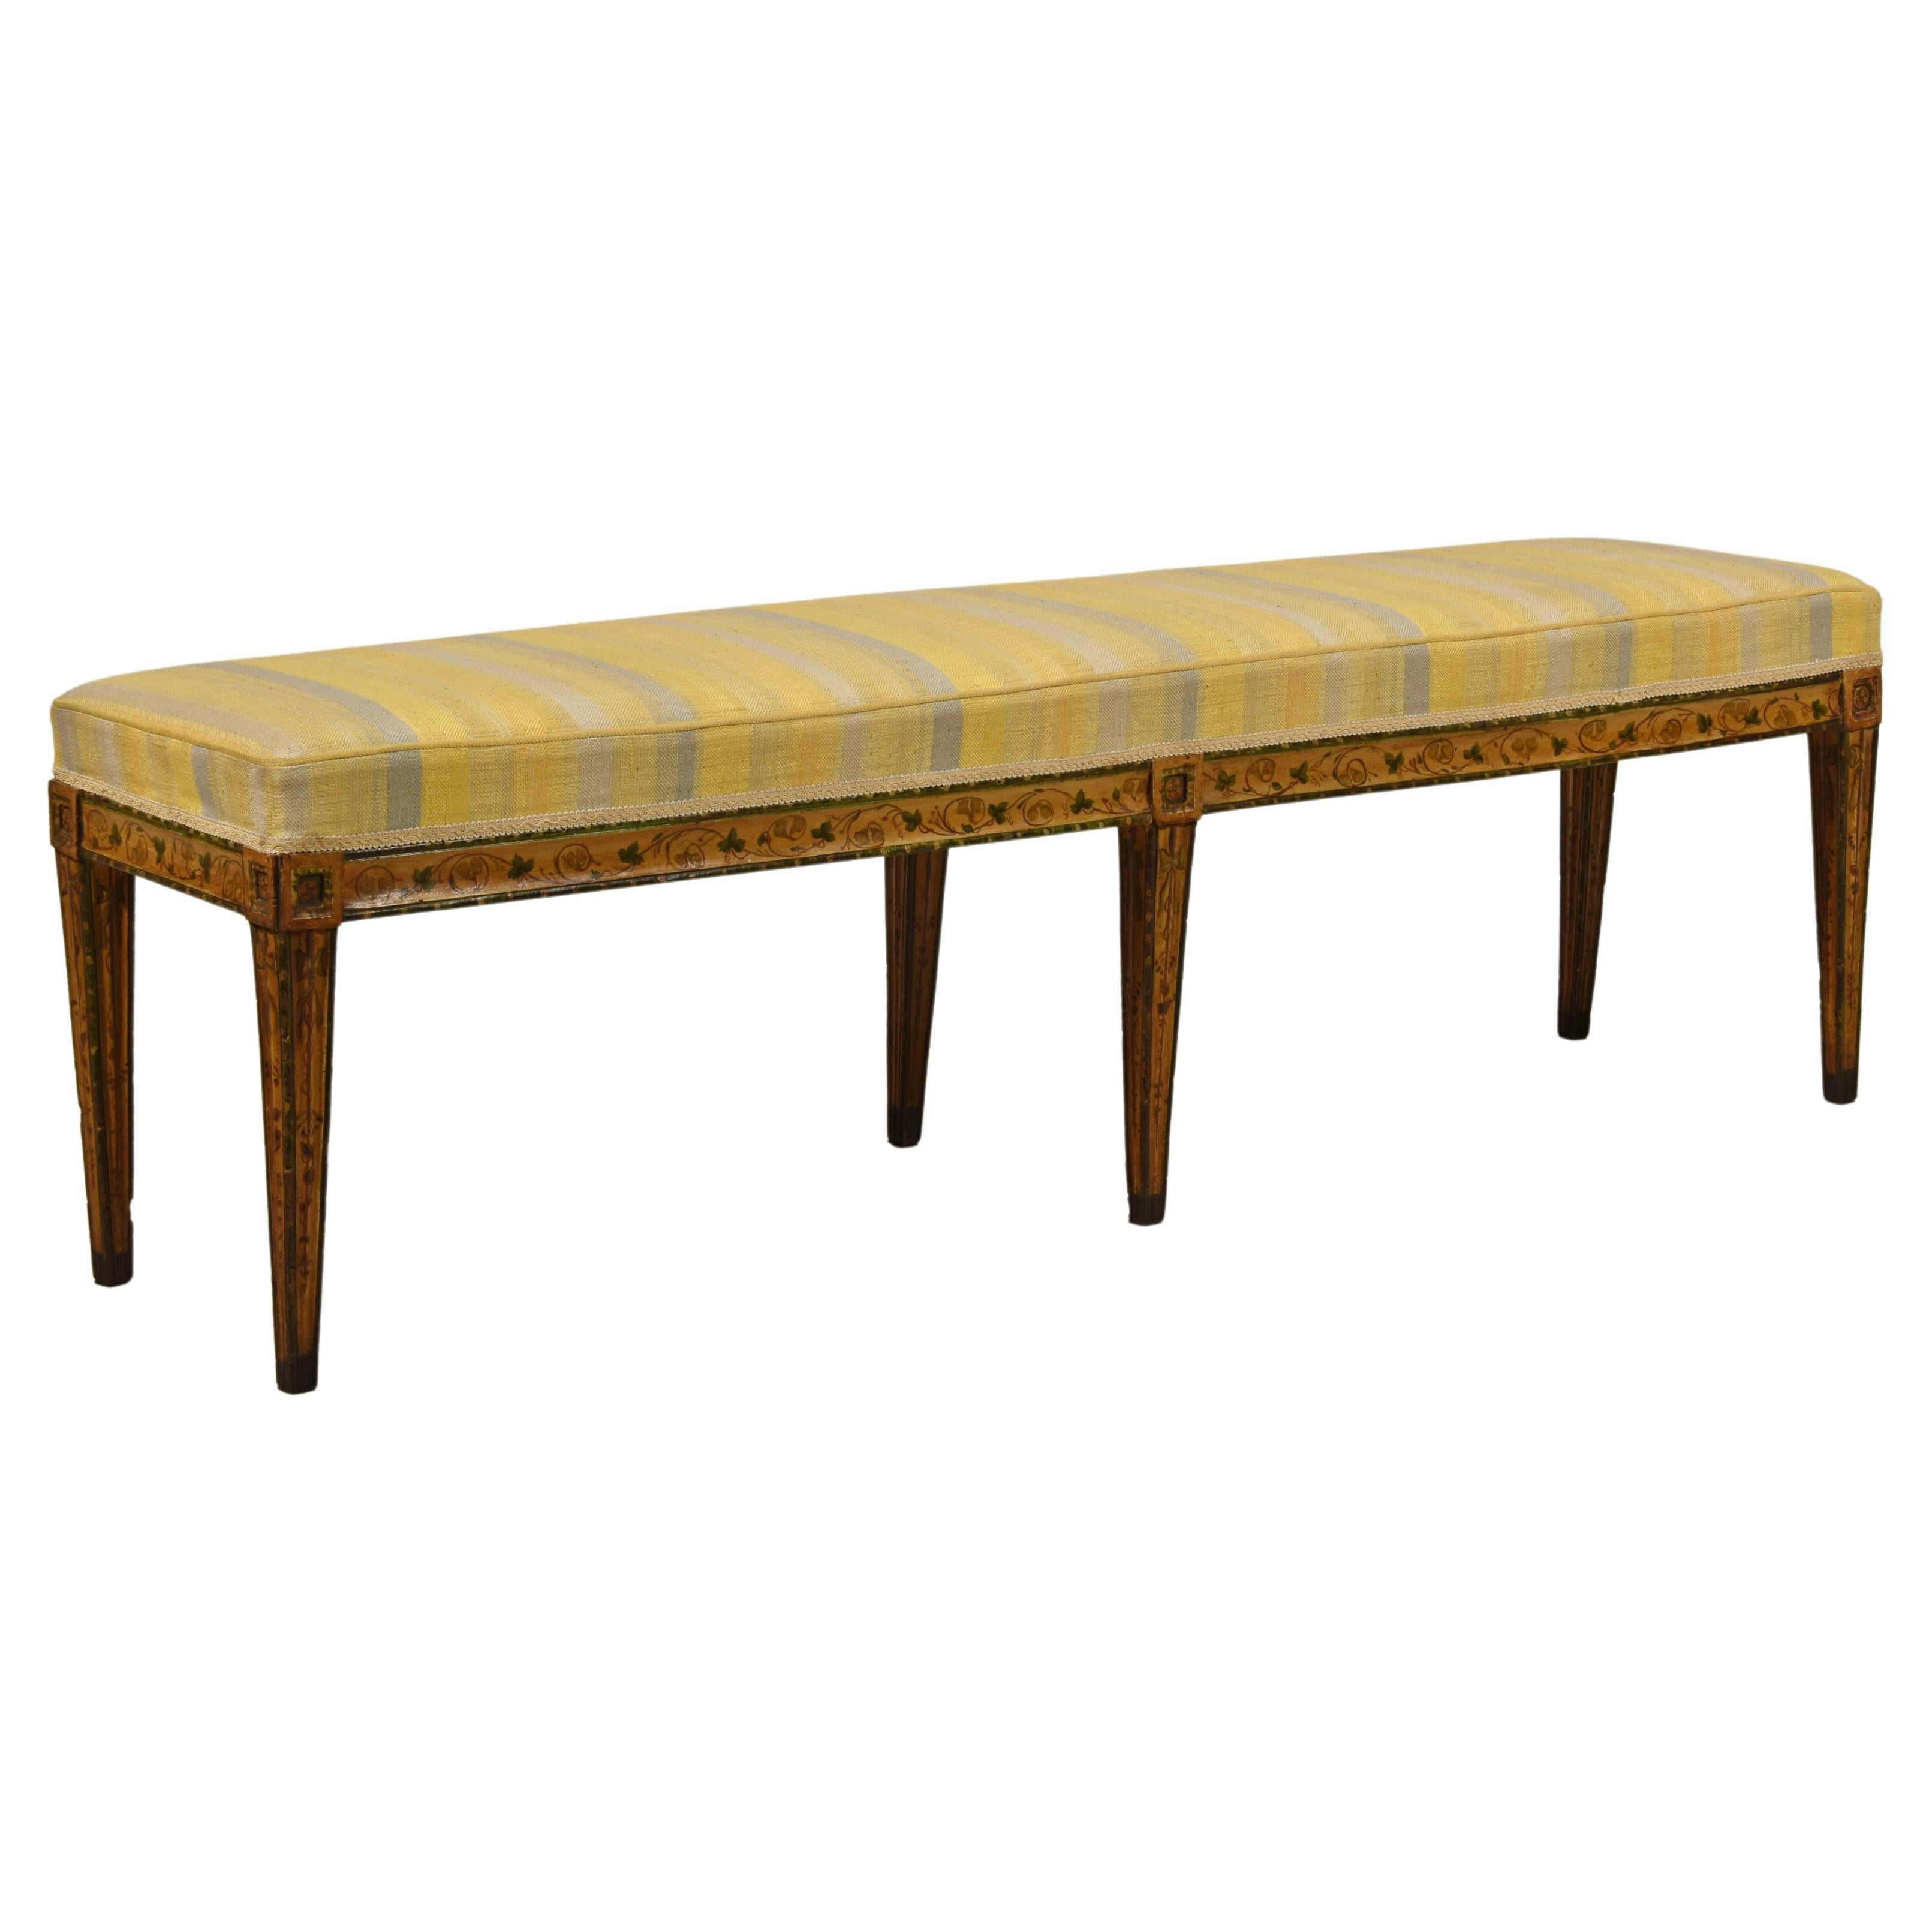 19th Century, Italian Six-legged Centre Bench Lacquered Wood with Ramage Motive